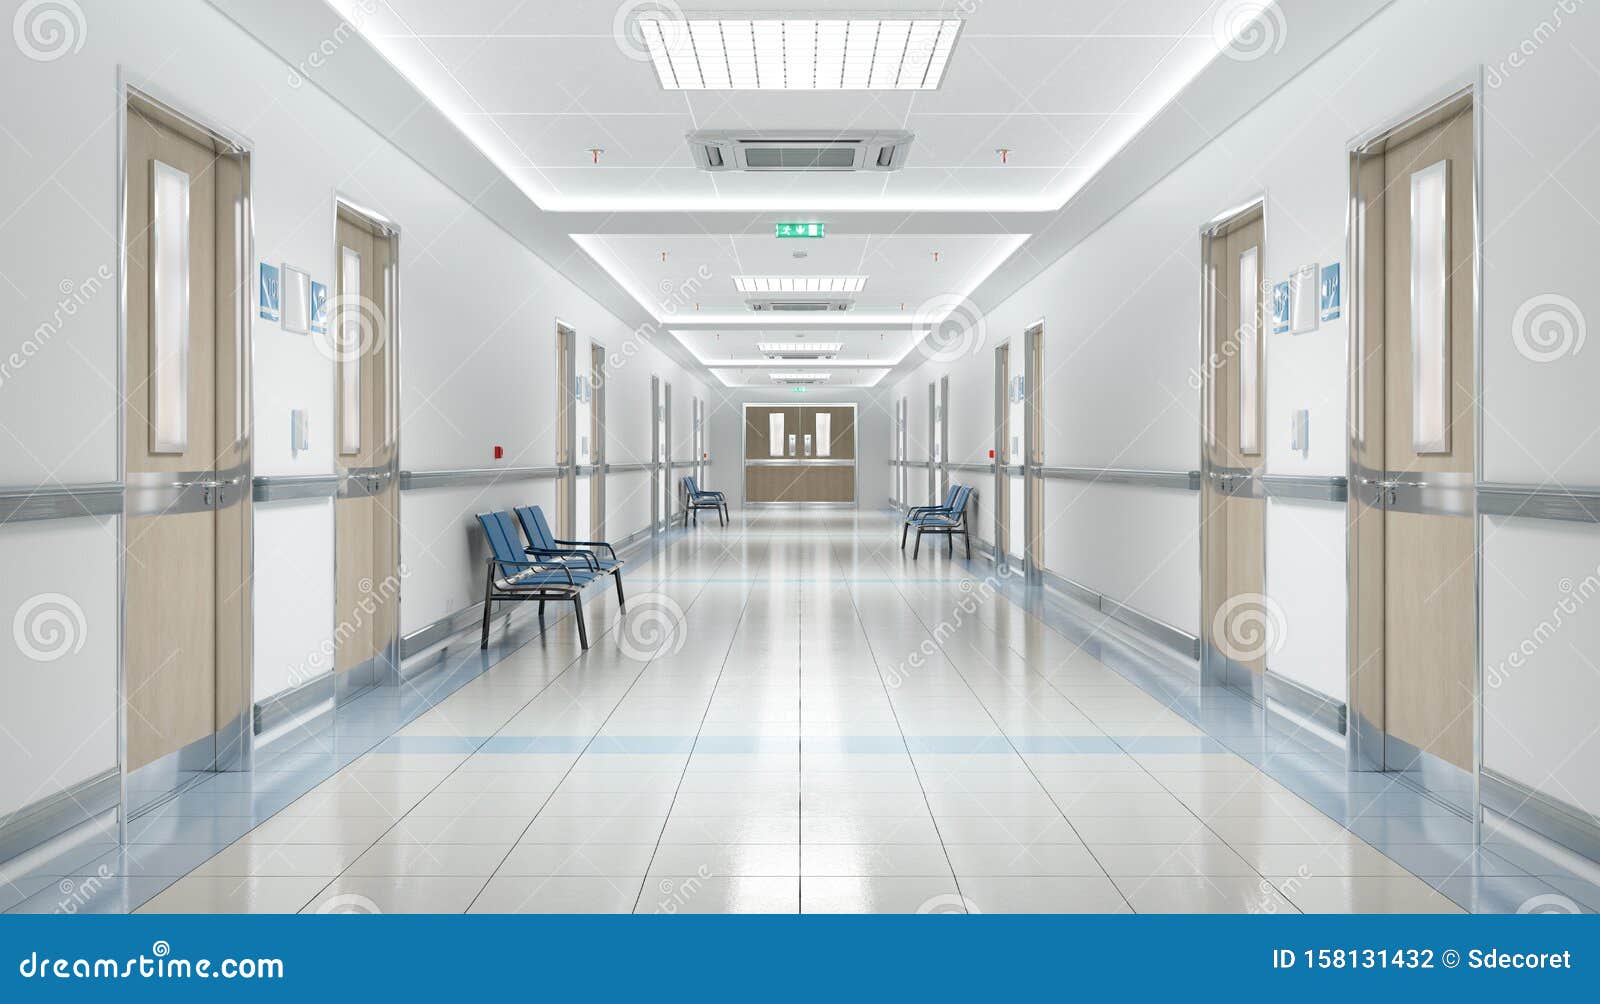 long hospital bright corridor with rooms and seats 3d rendering